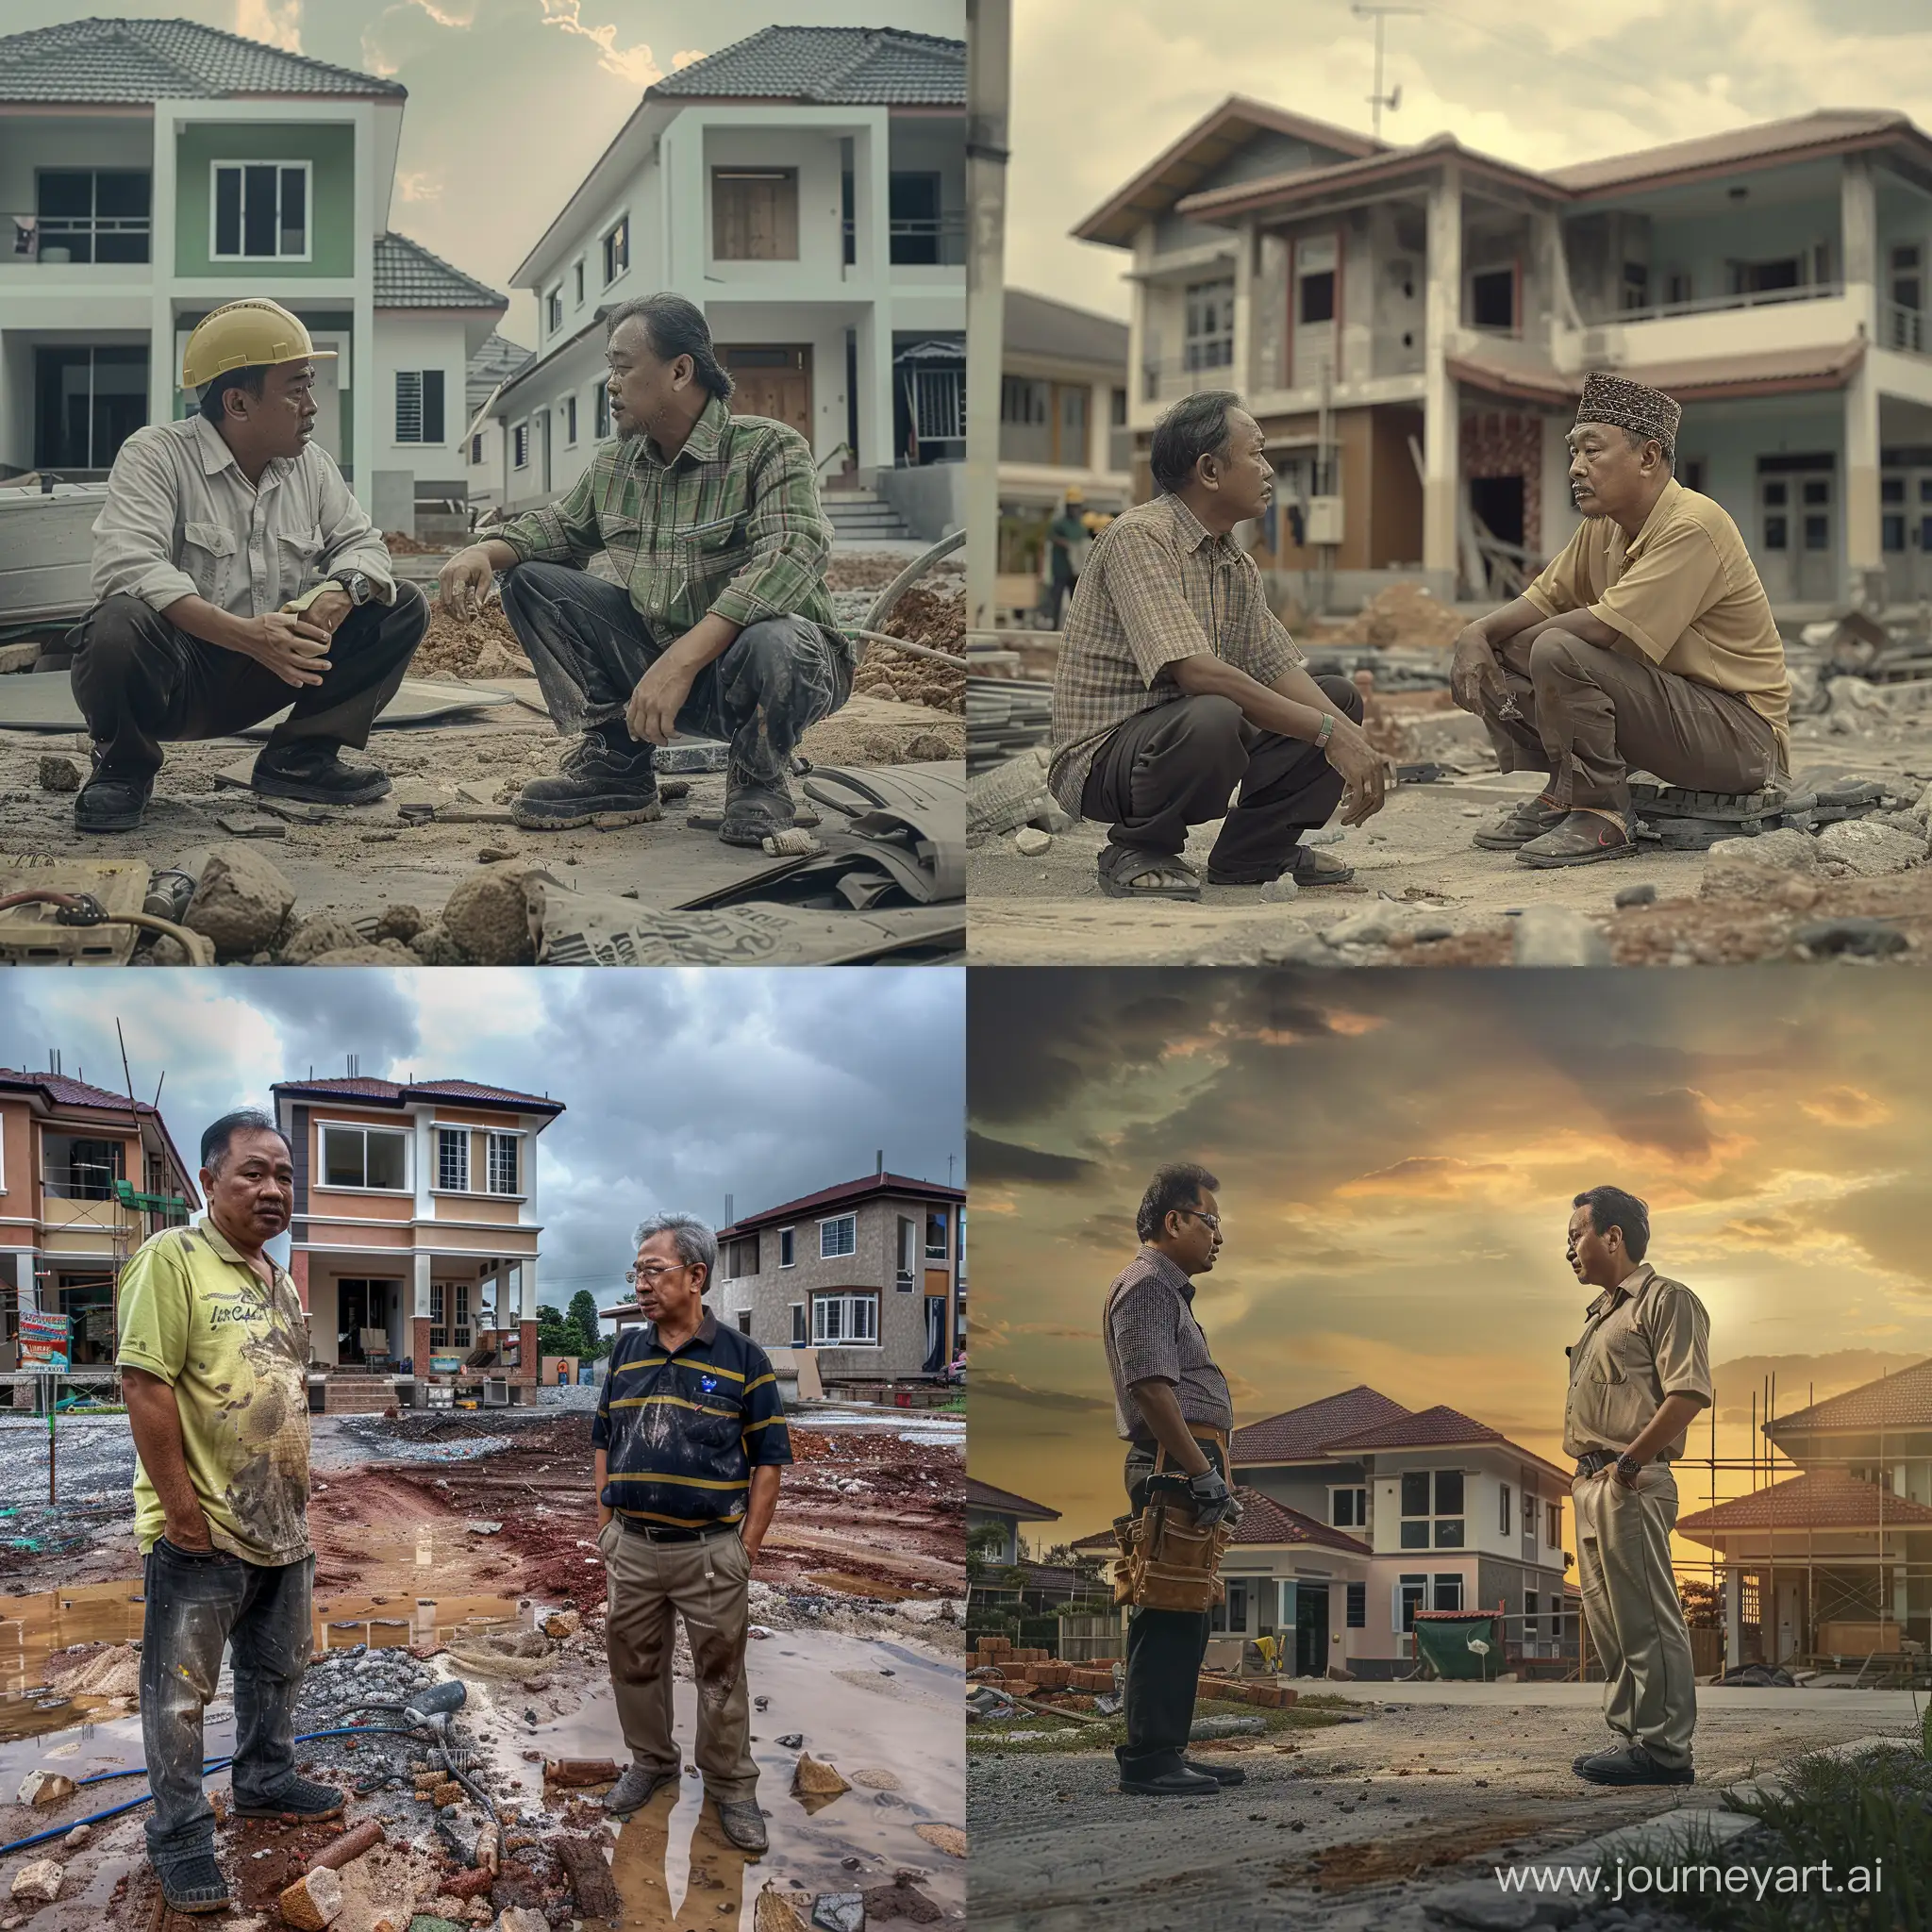 ultra realistic, a malay man contractor is persuading a customer who regrets the state of his house not yet being built, in front of the house that is being built, canon eos-id x mark iii dslr --v 6.0